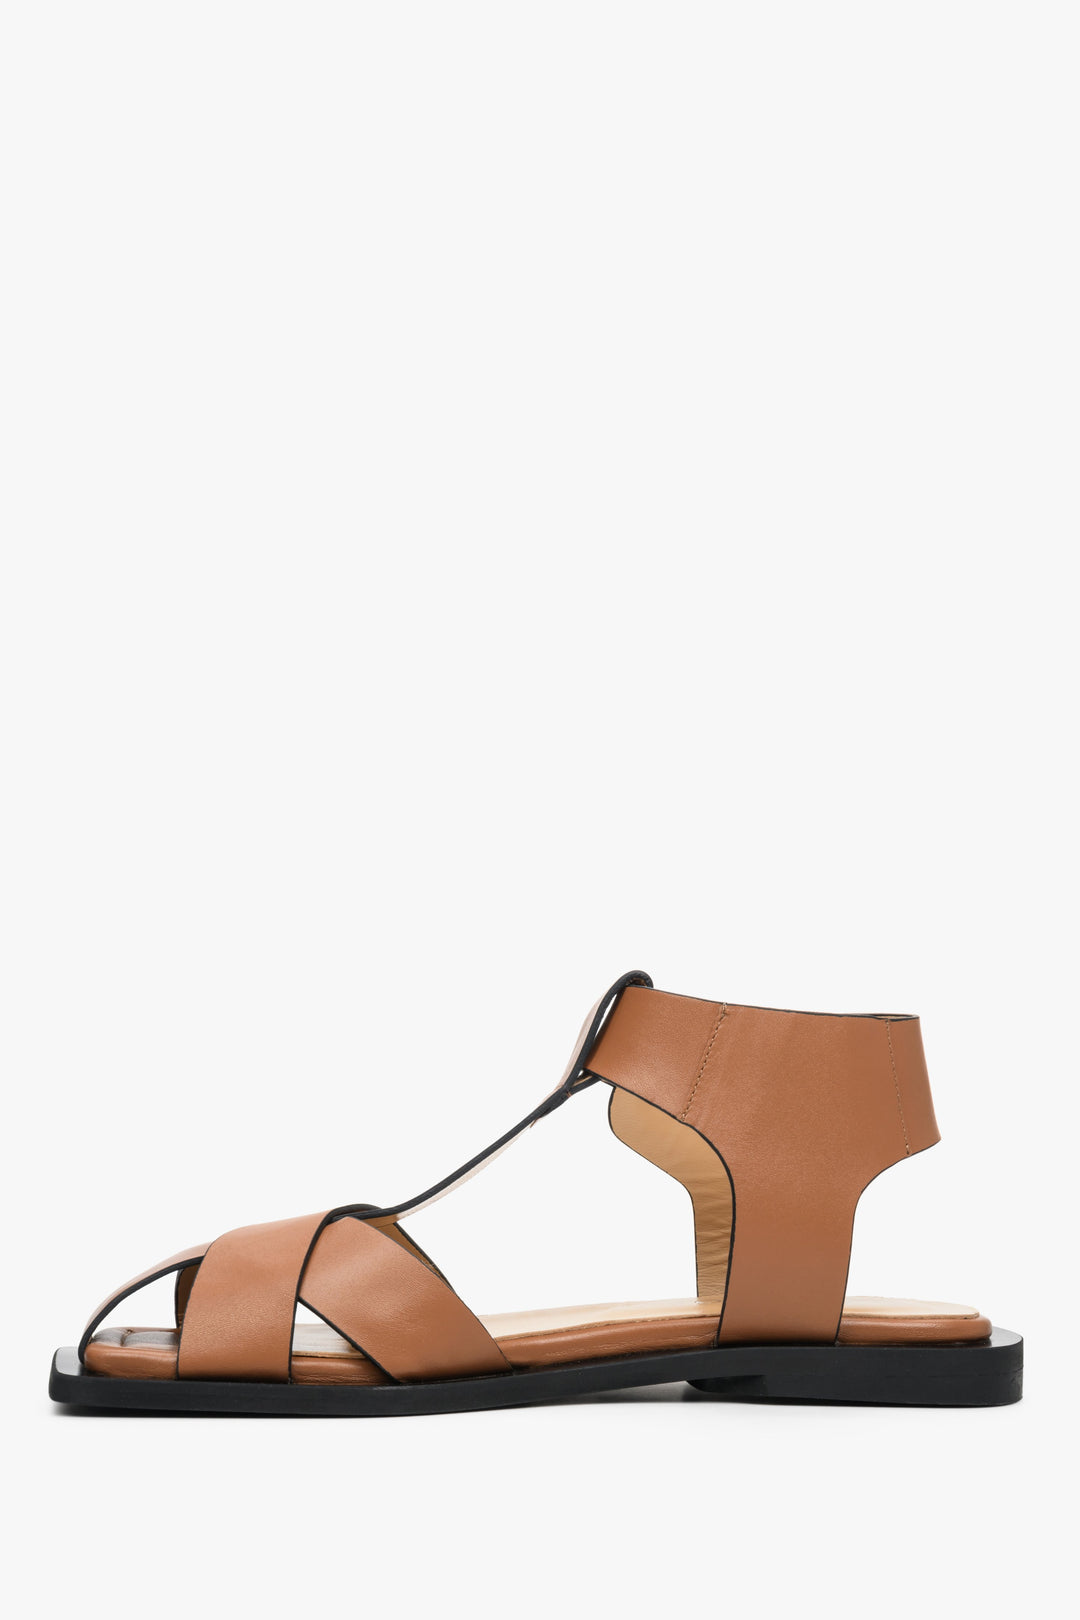 Women's sandals in brown color with thick straps for summer, brand Estro.